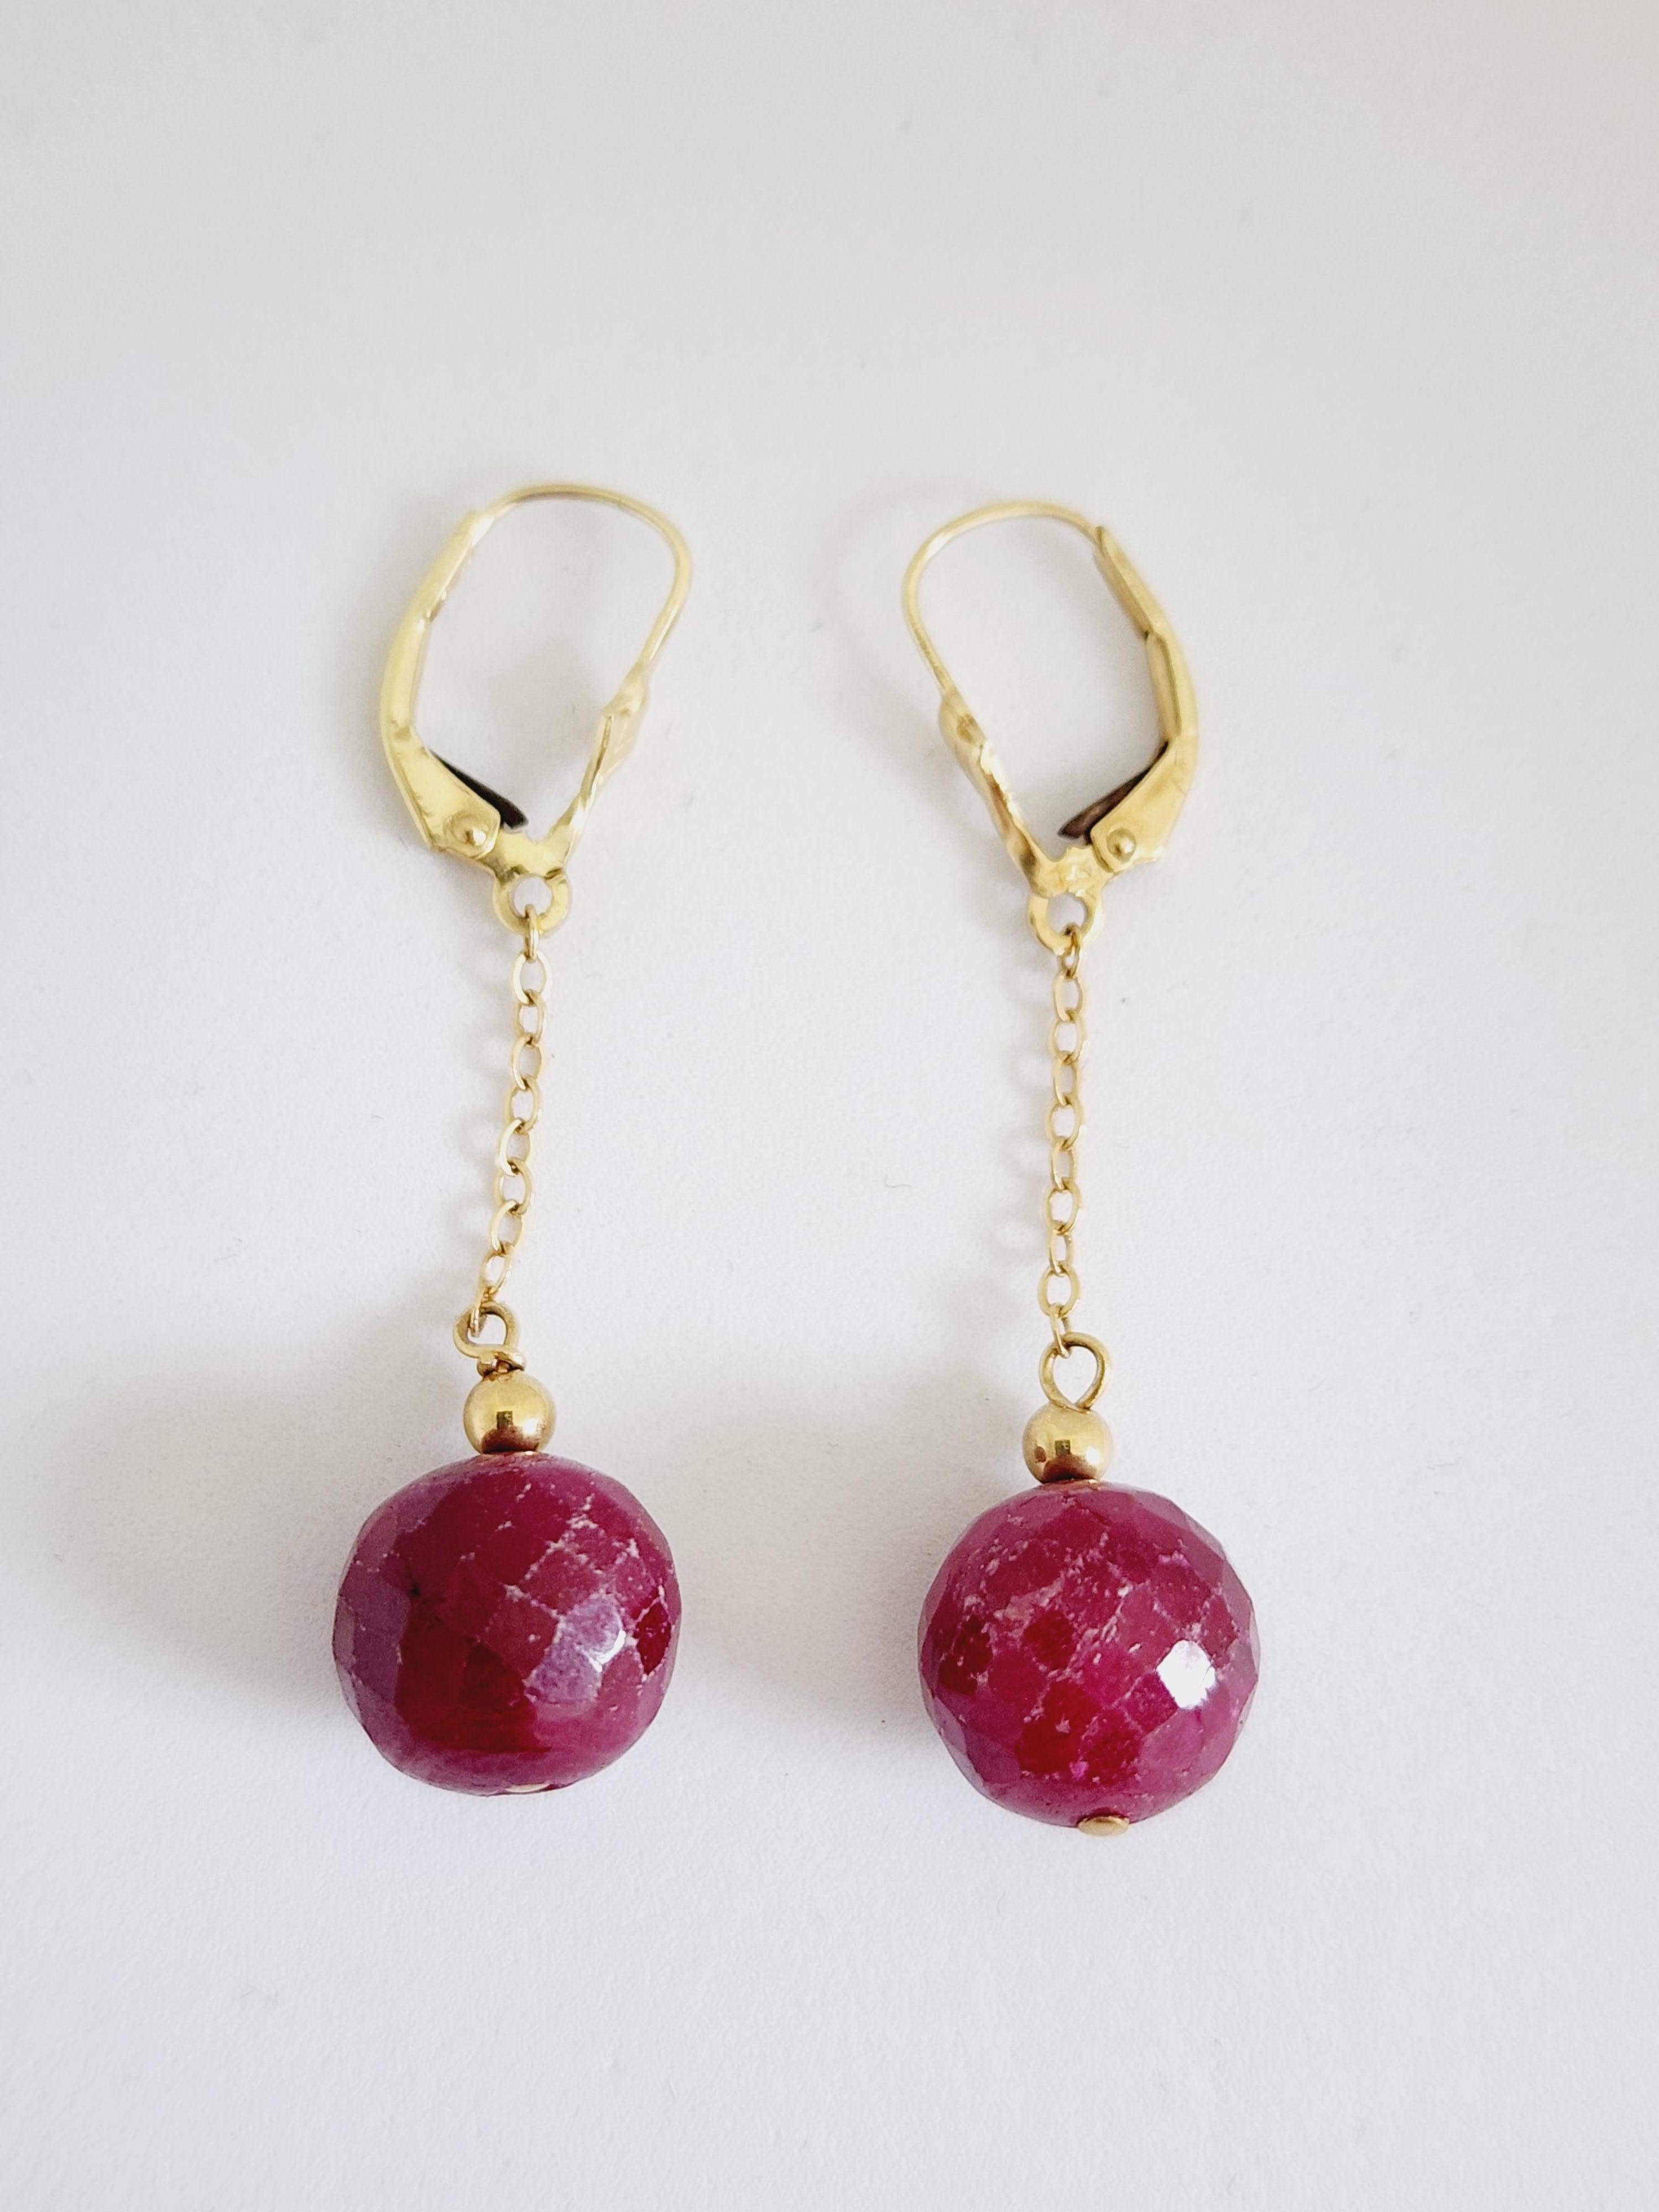 32.40 Carats Ruby Earrings Round Yellow Gold 14 Karat In New Condition For Sale In Great Neck, NY